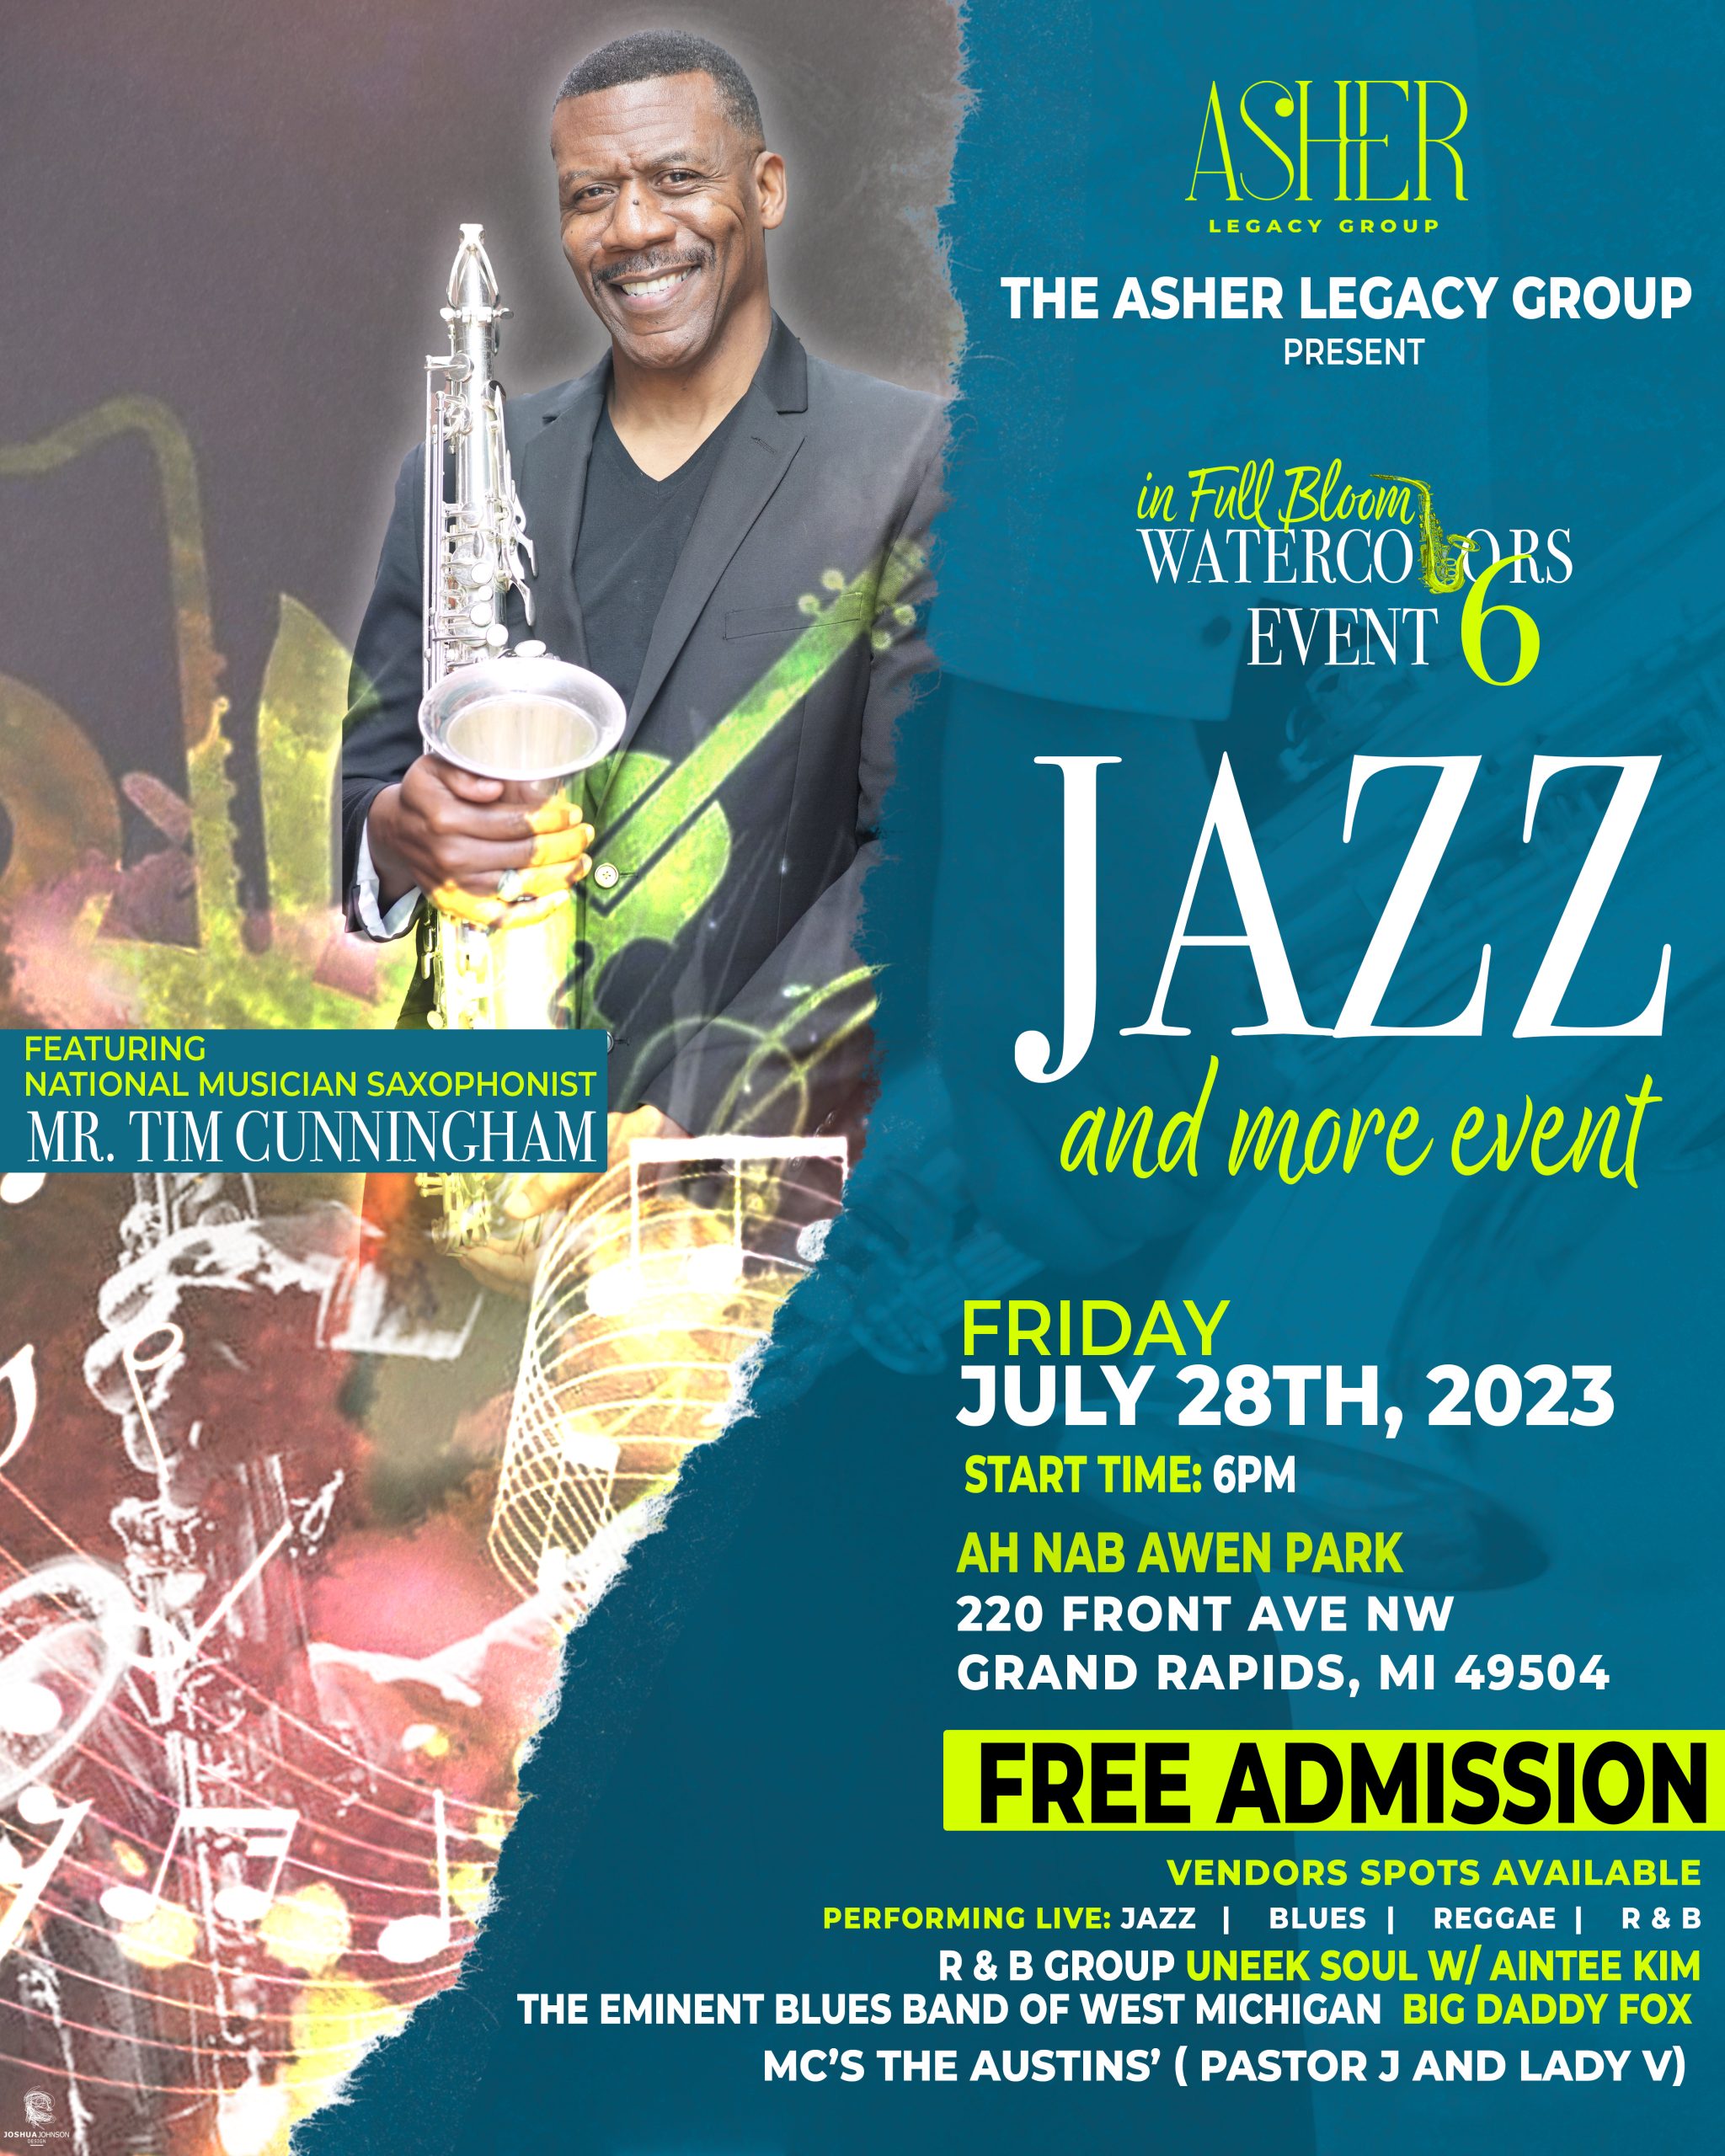 Jazz and More on the River